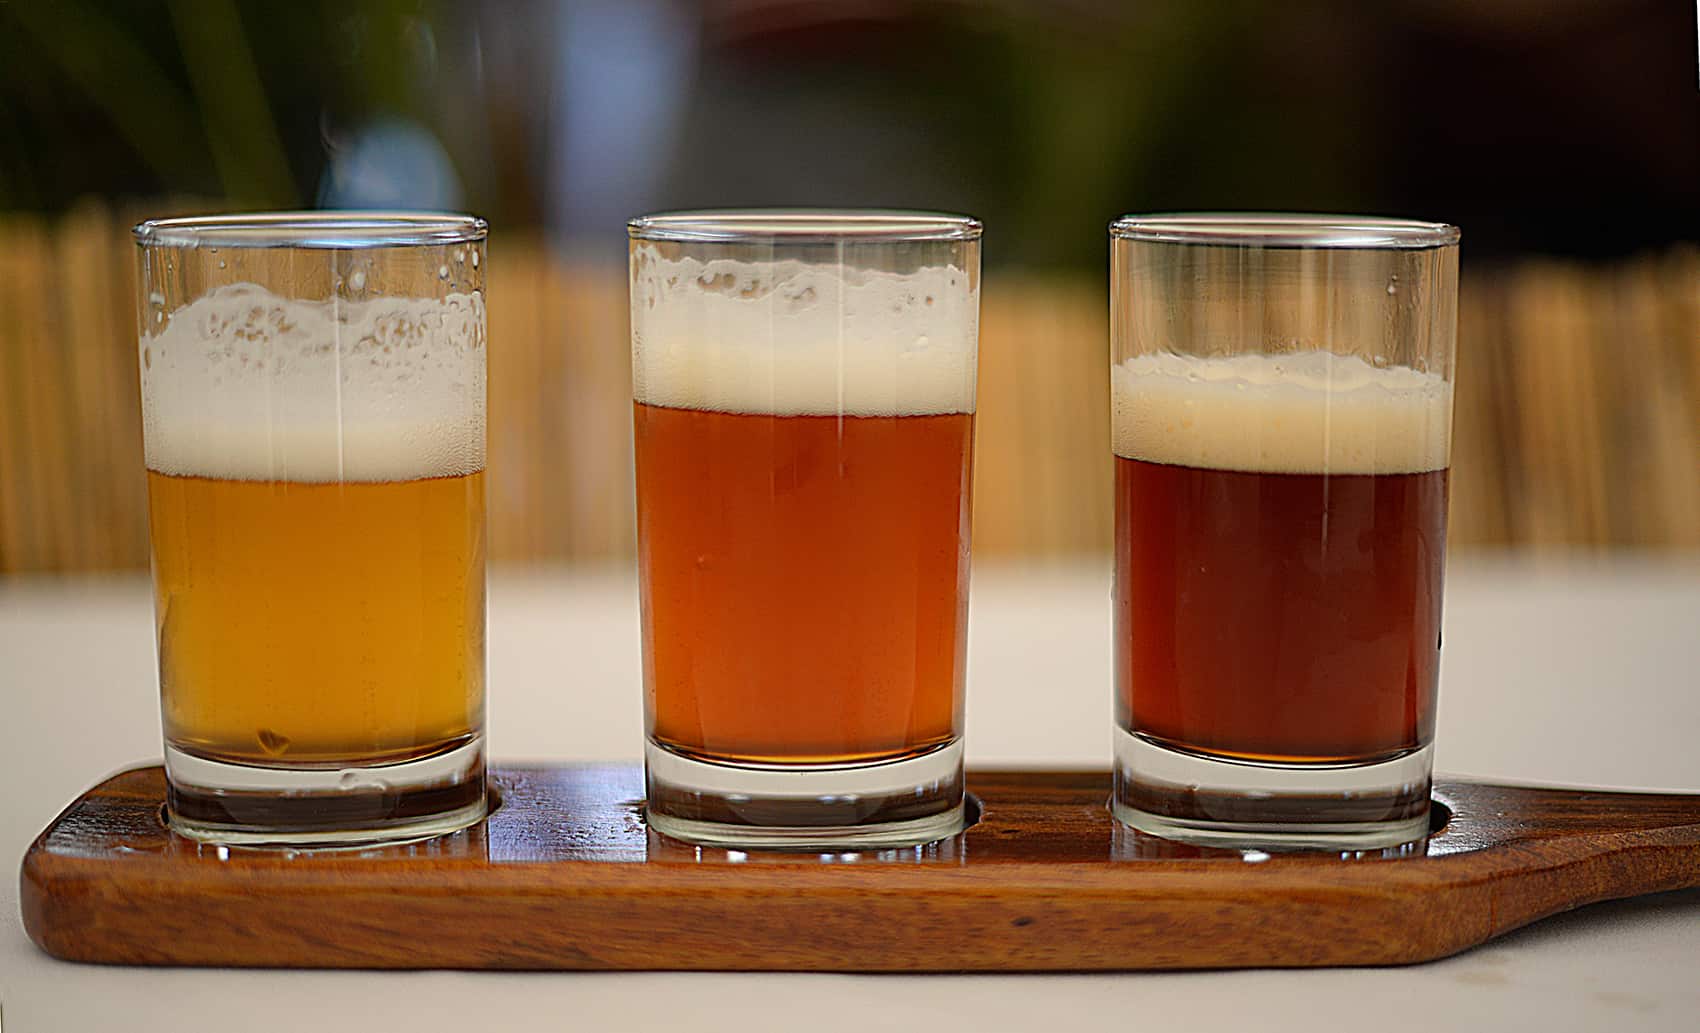 Three shades of beer from La Selva Brewery.